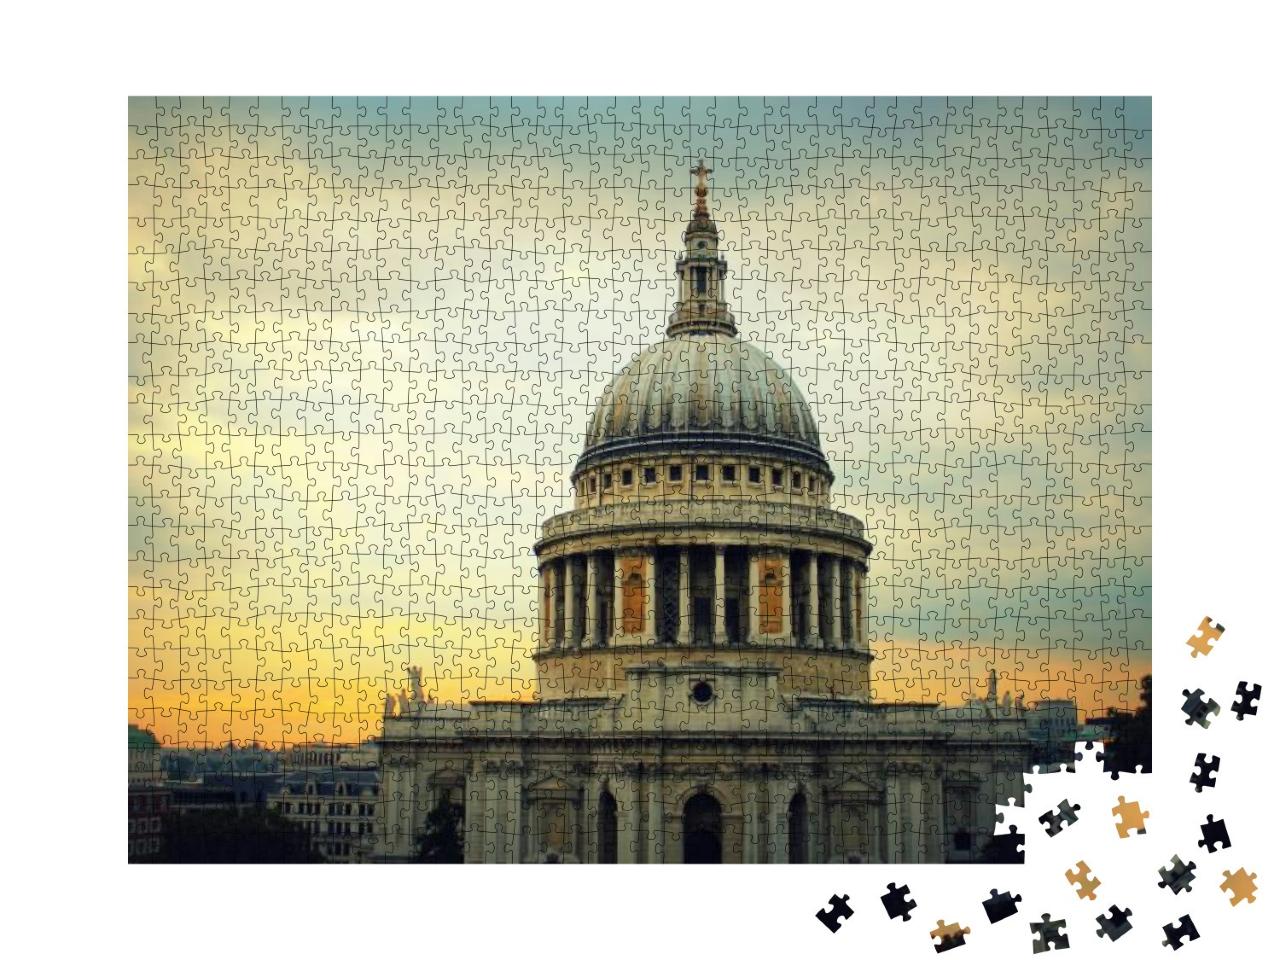 Puzzle 1000 Teile „St. Pauls Cathedral in London, England“